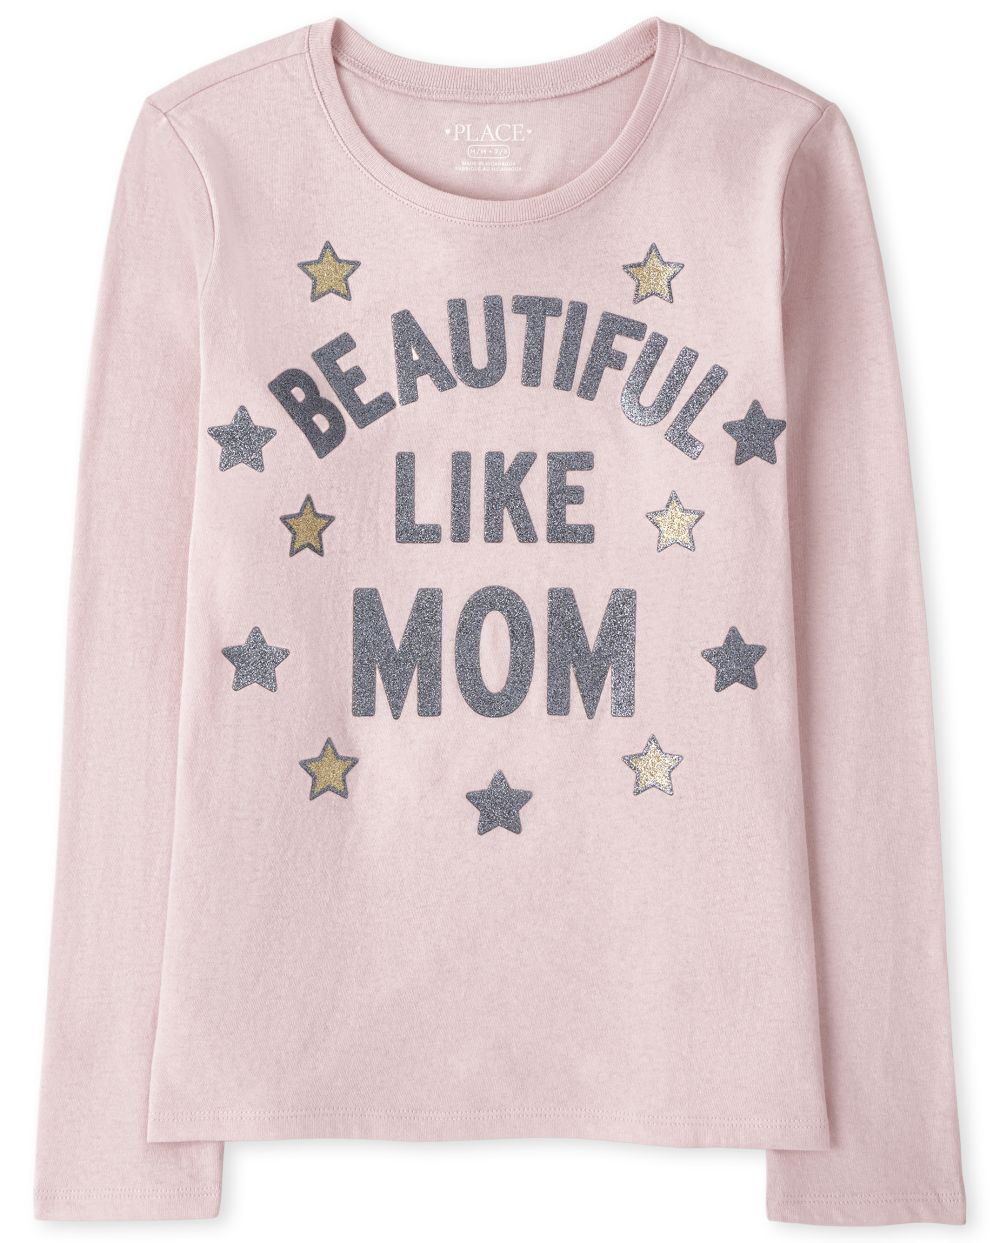 

Girls Beautiful Like Mom Graphic Tee - Pink T-Shirt - The Children's Place